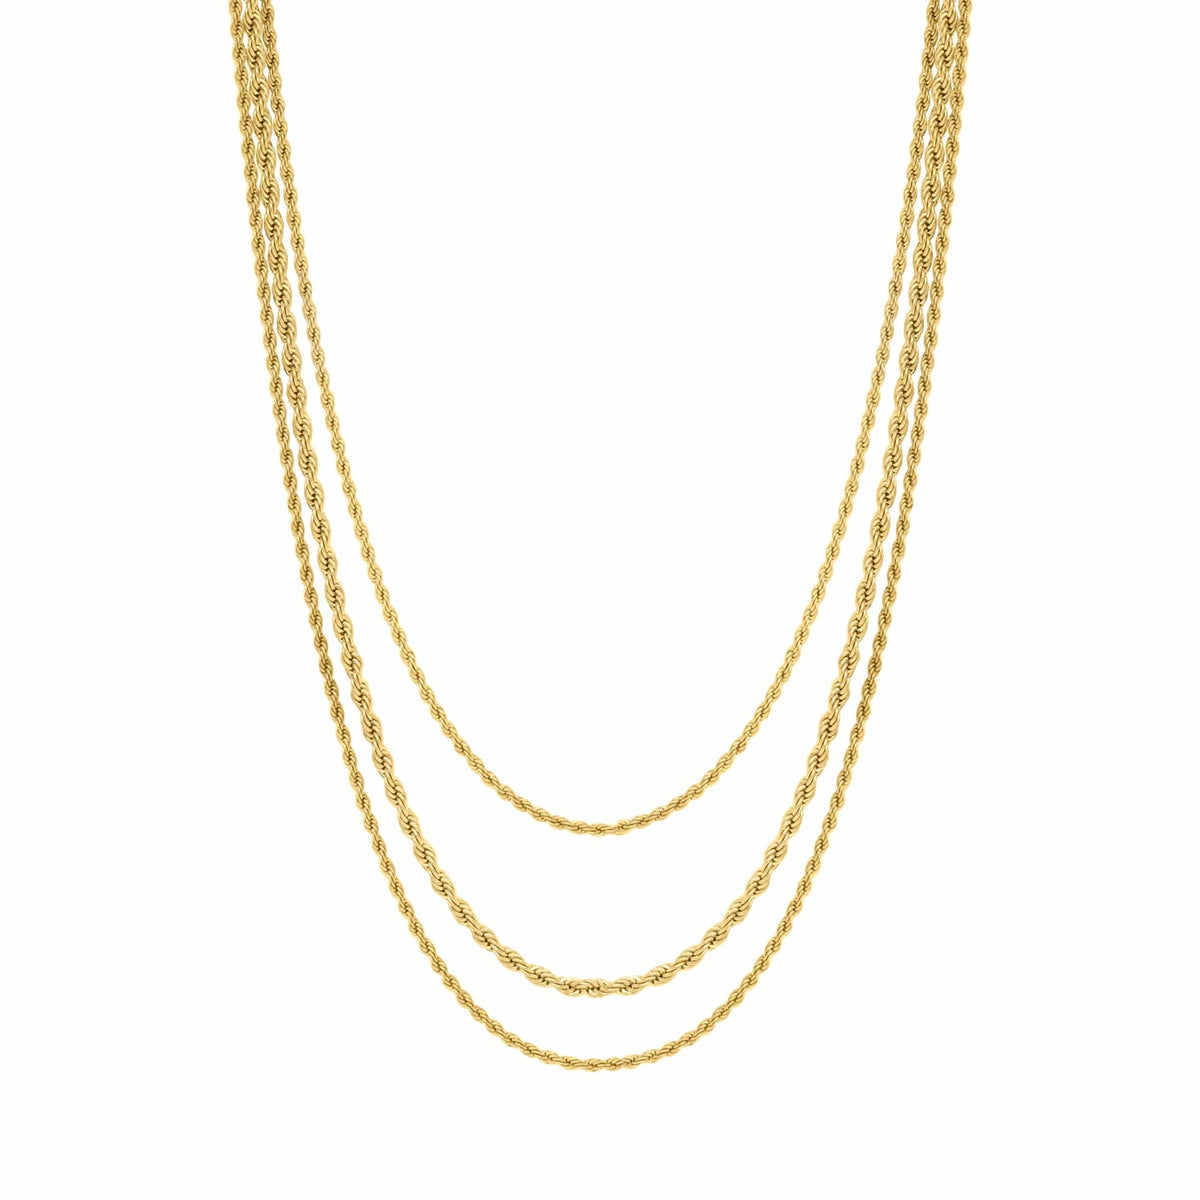 BohoMoon Stainless Steel Align Layered Necklace Gold